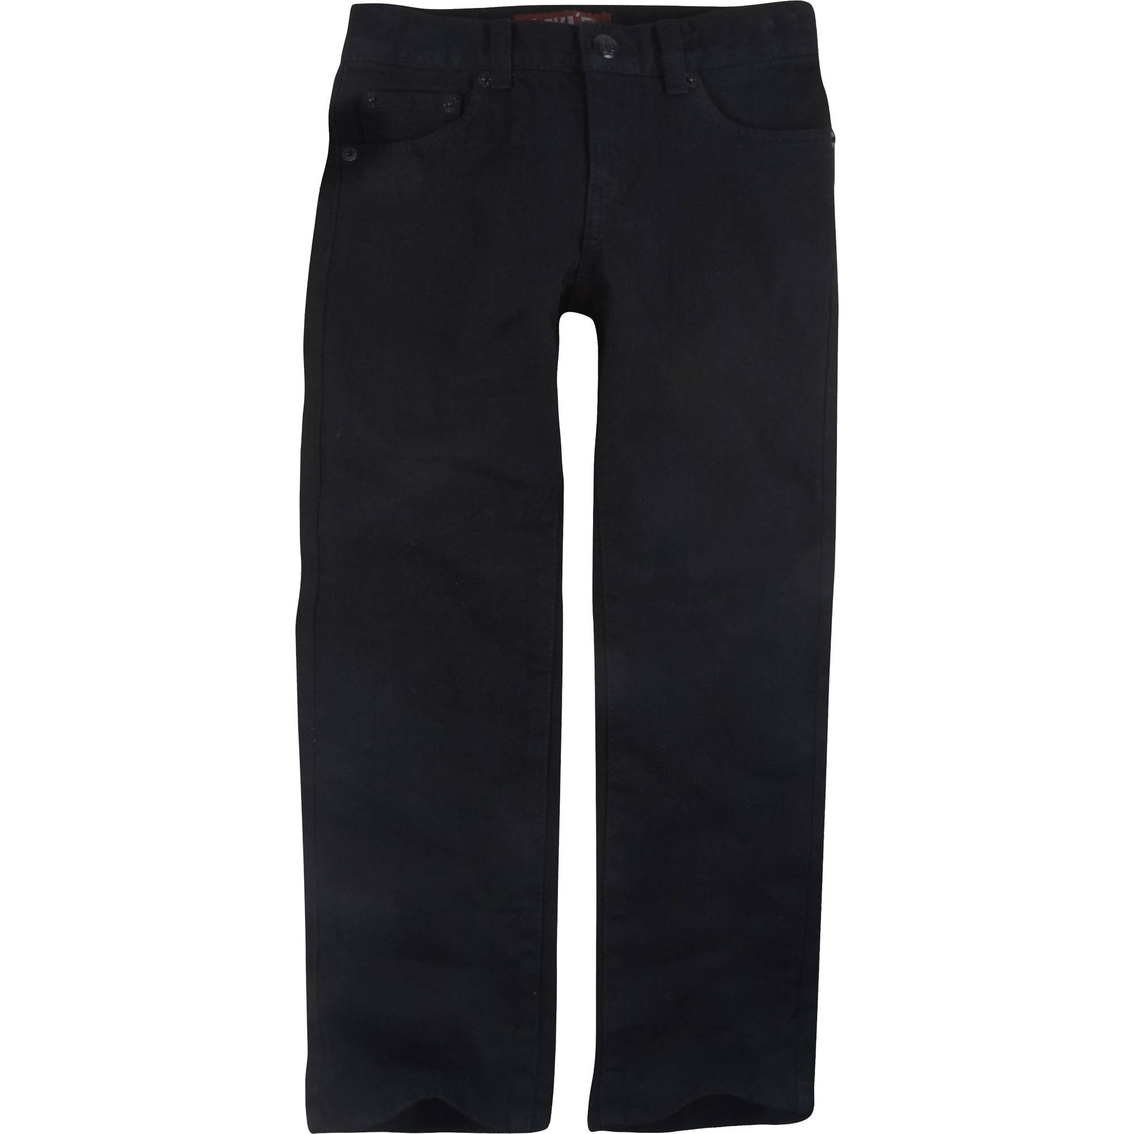 Levi's Boys 511 Skinny Jeans | Boys 8-20 | Clothing & Accessories ...